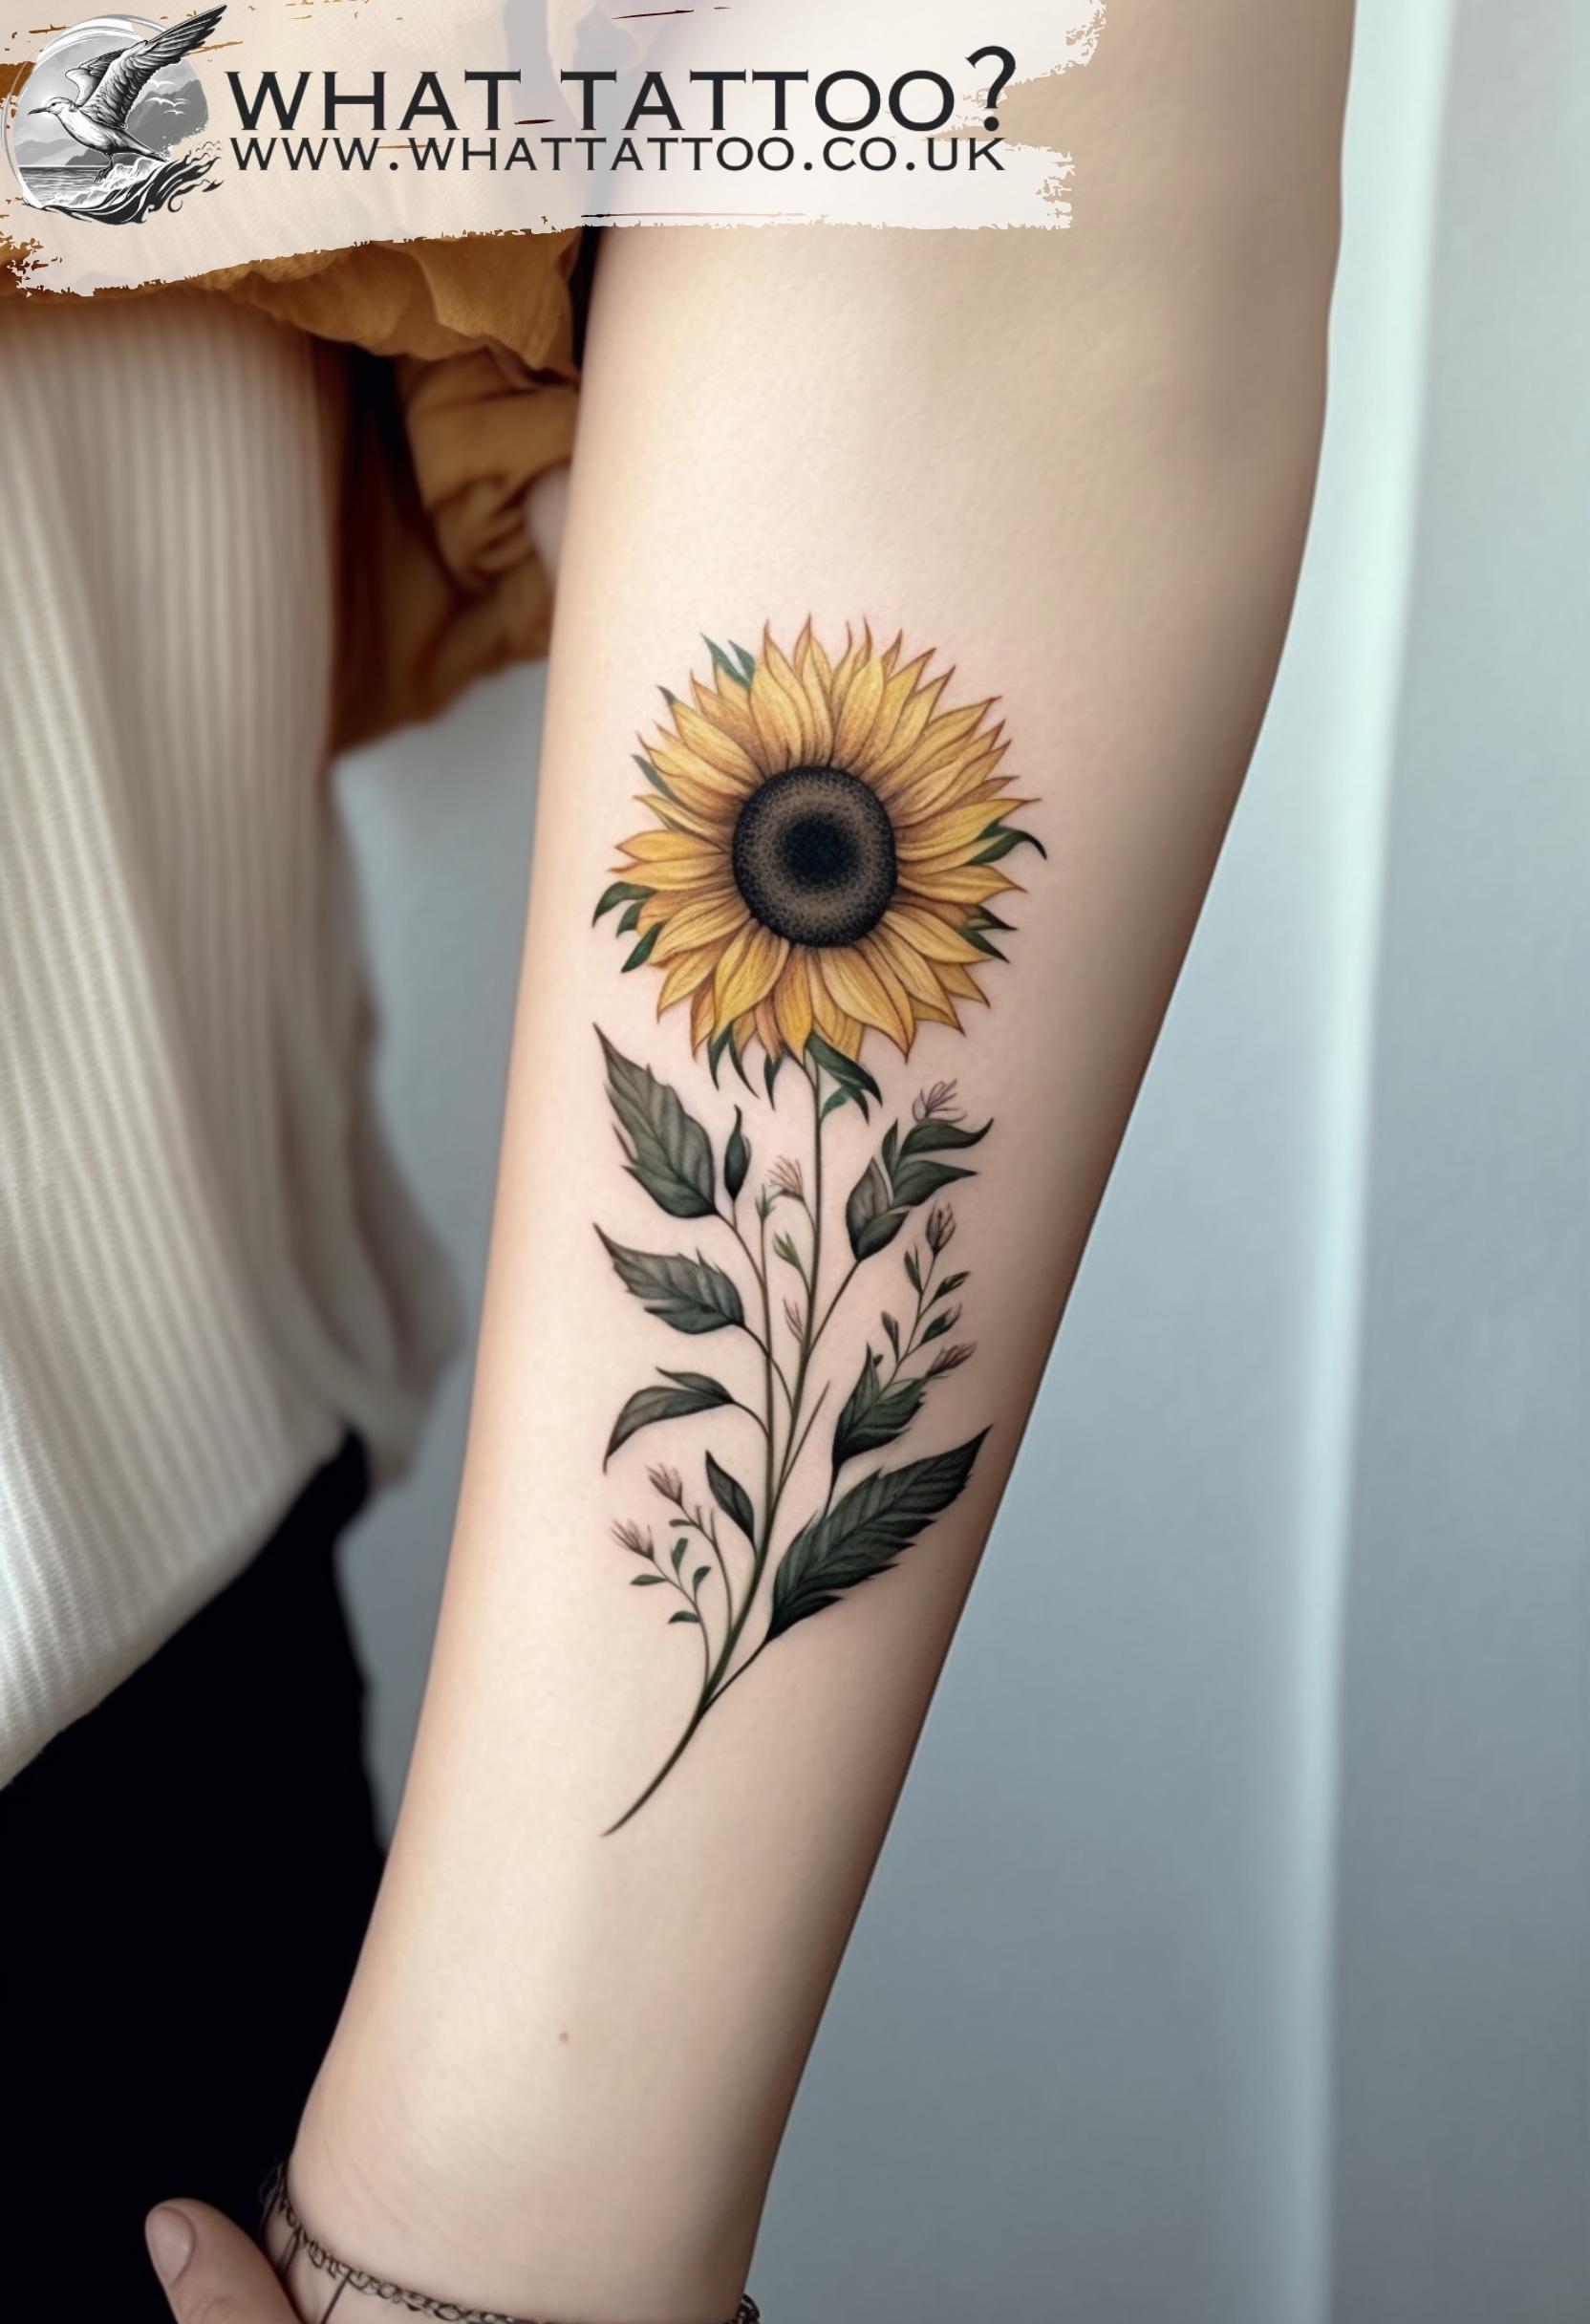 Buy Amor Sunflower Tattoo Personalized Temporary Flower Tattoo Waterproof  Removable Tattoo With Names and Flowers Flower Tattoo Idea Online in India  - Etsy